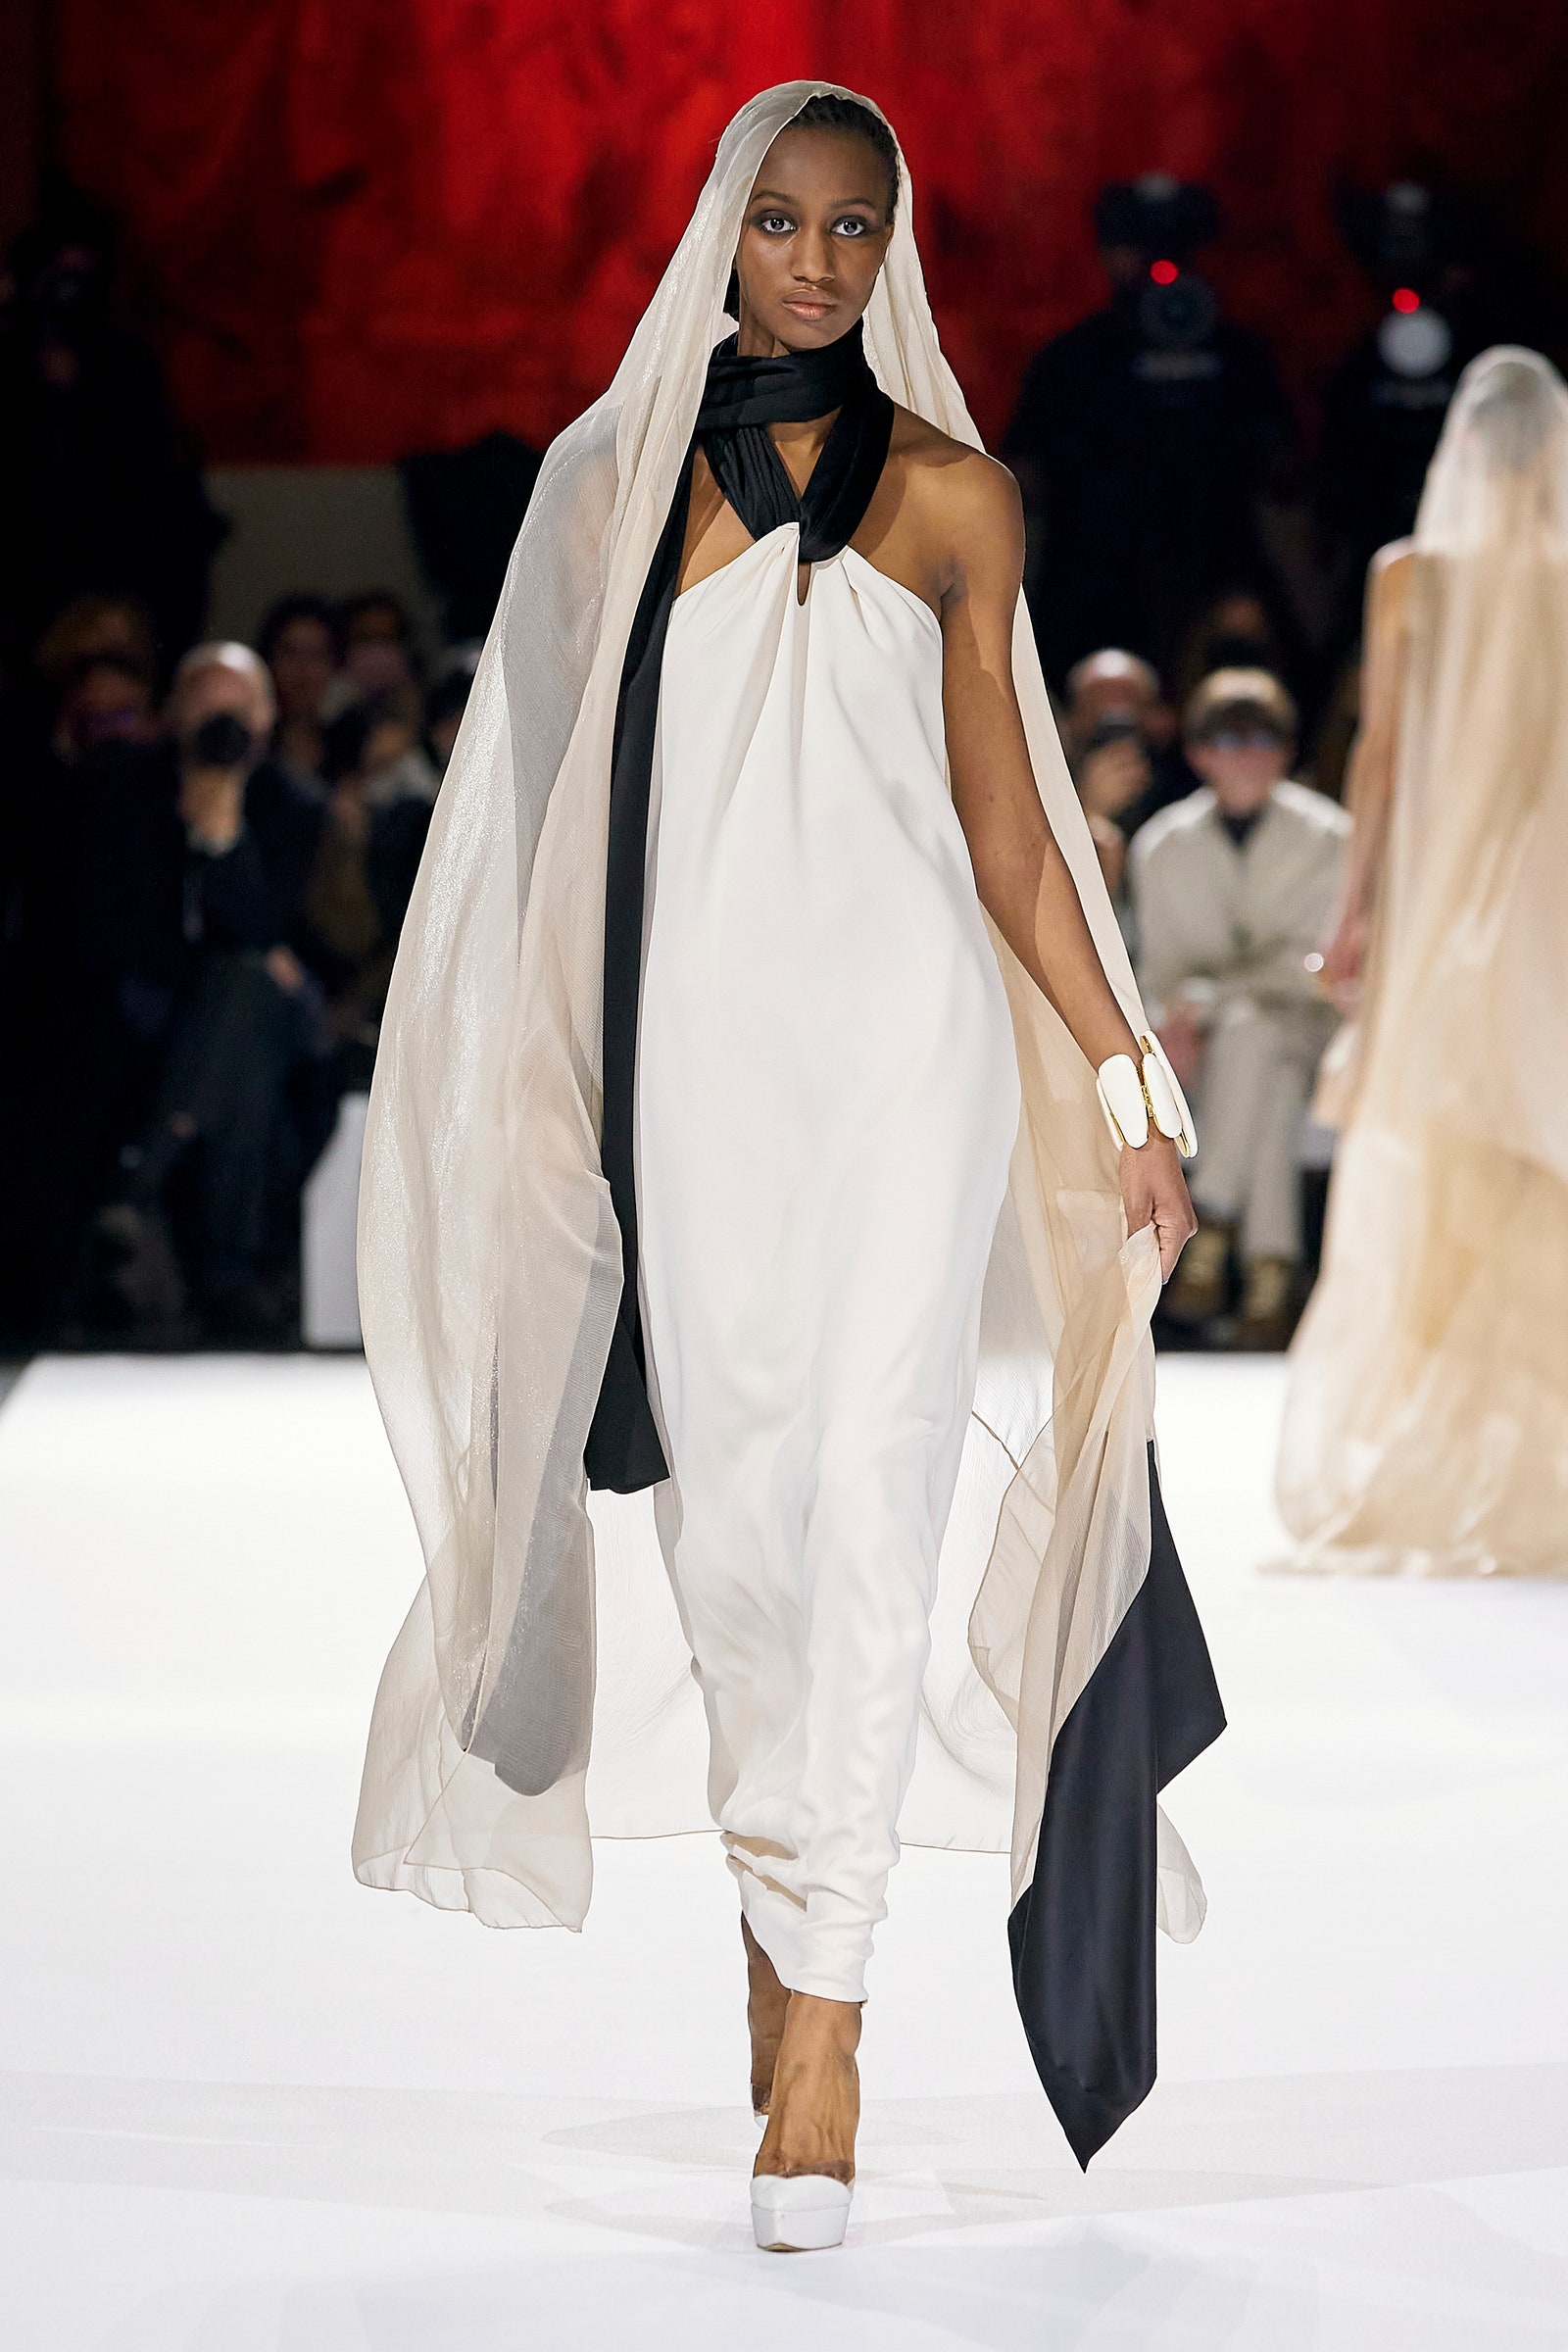 Stephane Rolland Haute Couture